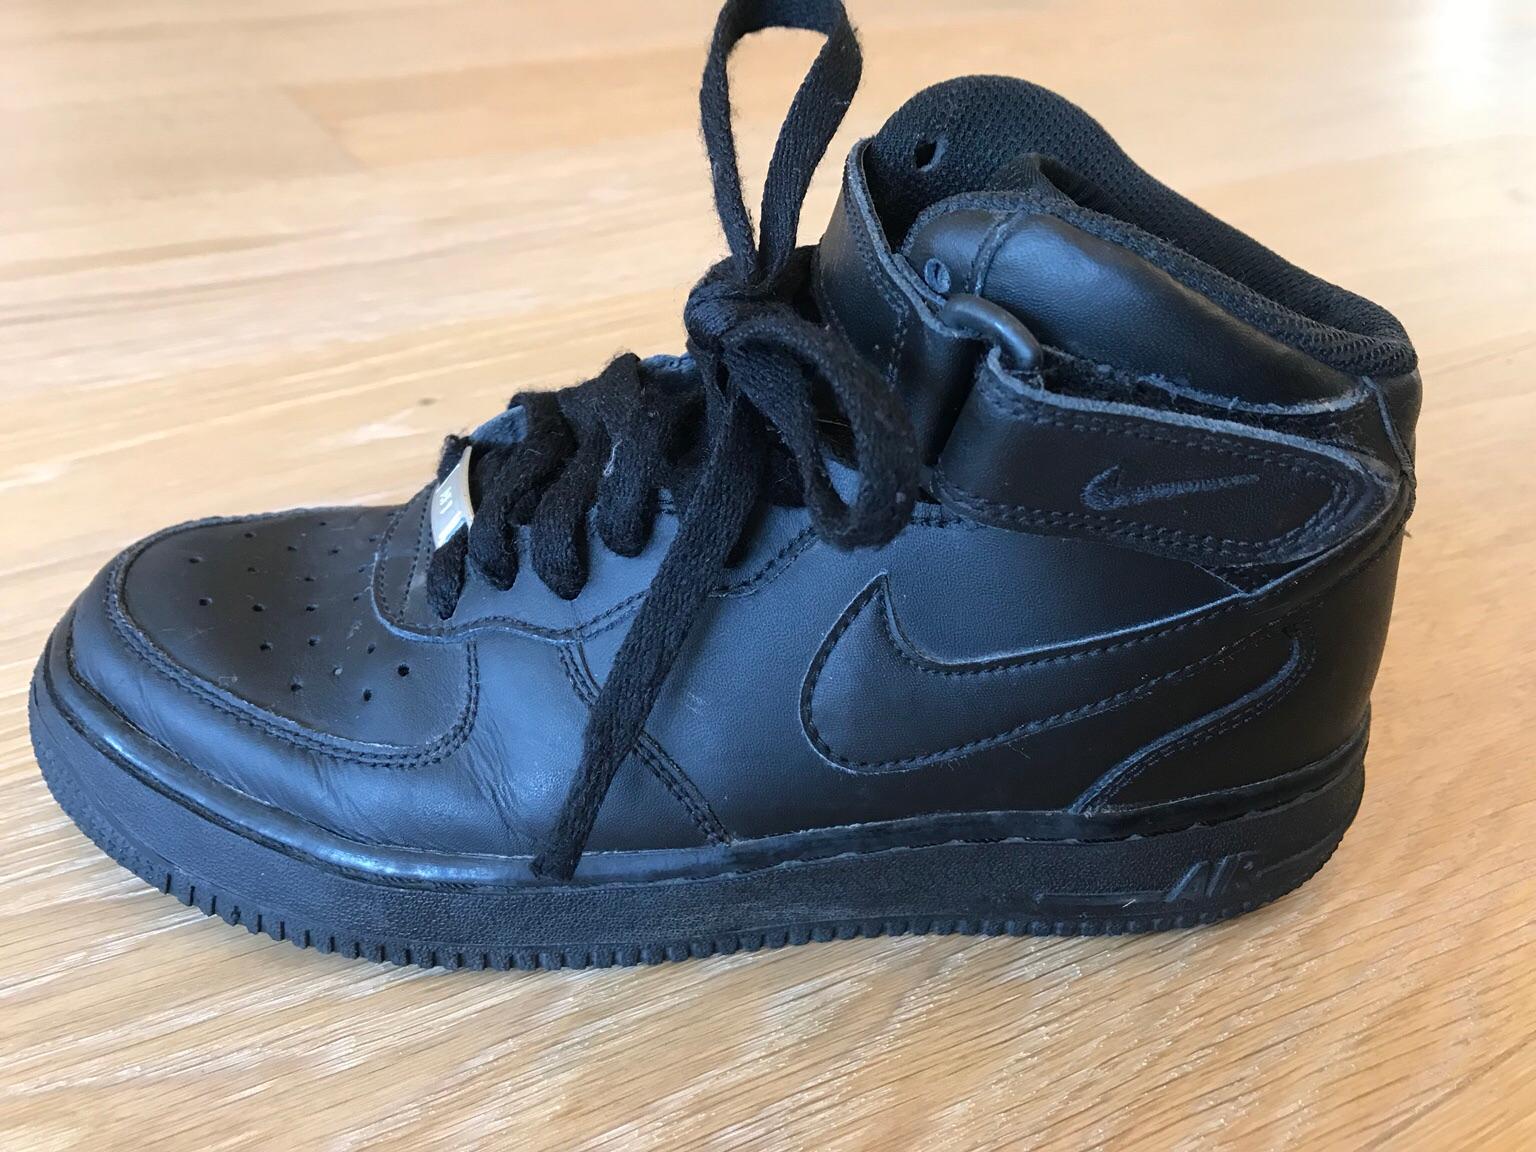 Nike Air Force 1 Mid schwarz Gr. 38 in 9500 Seebach-Wasenboden for €27.00  for sale | Shpock